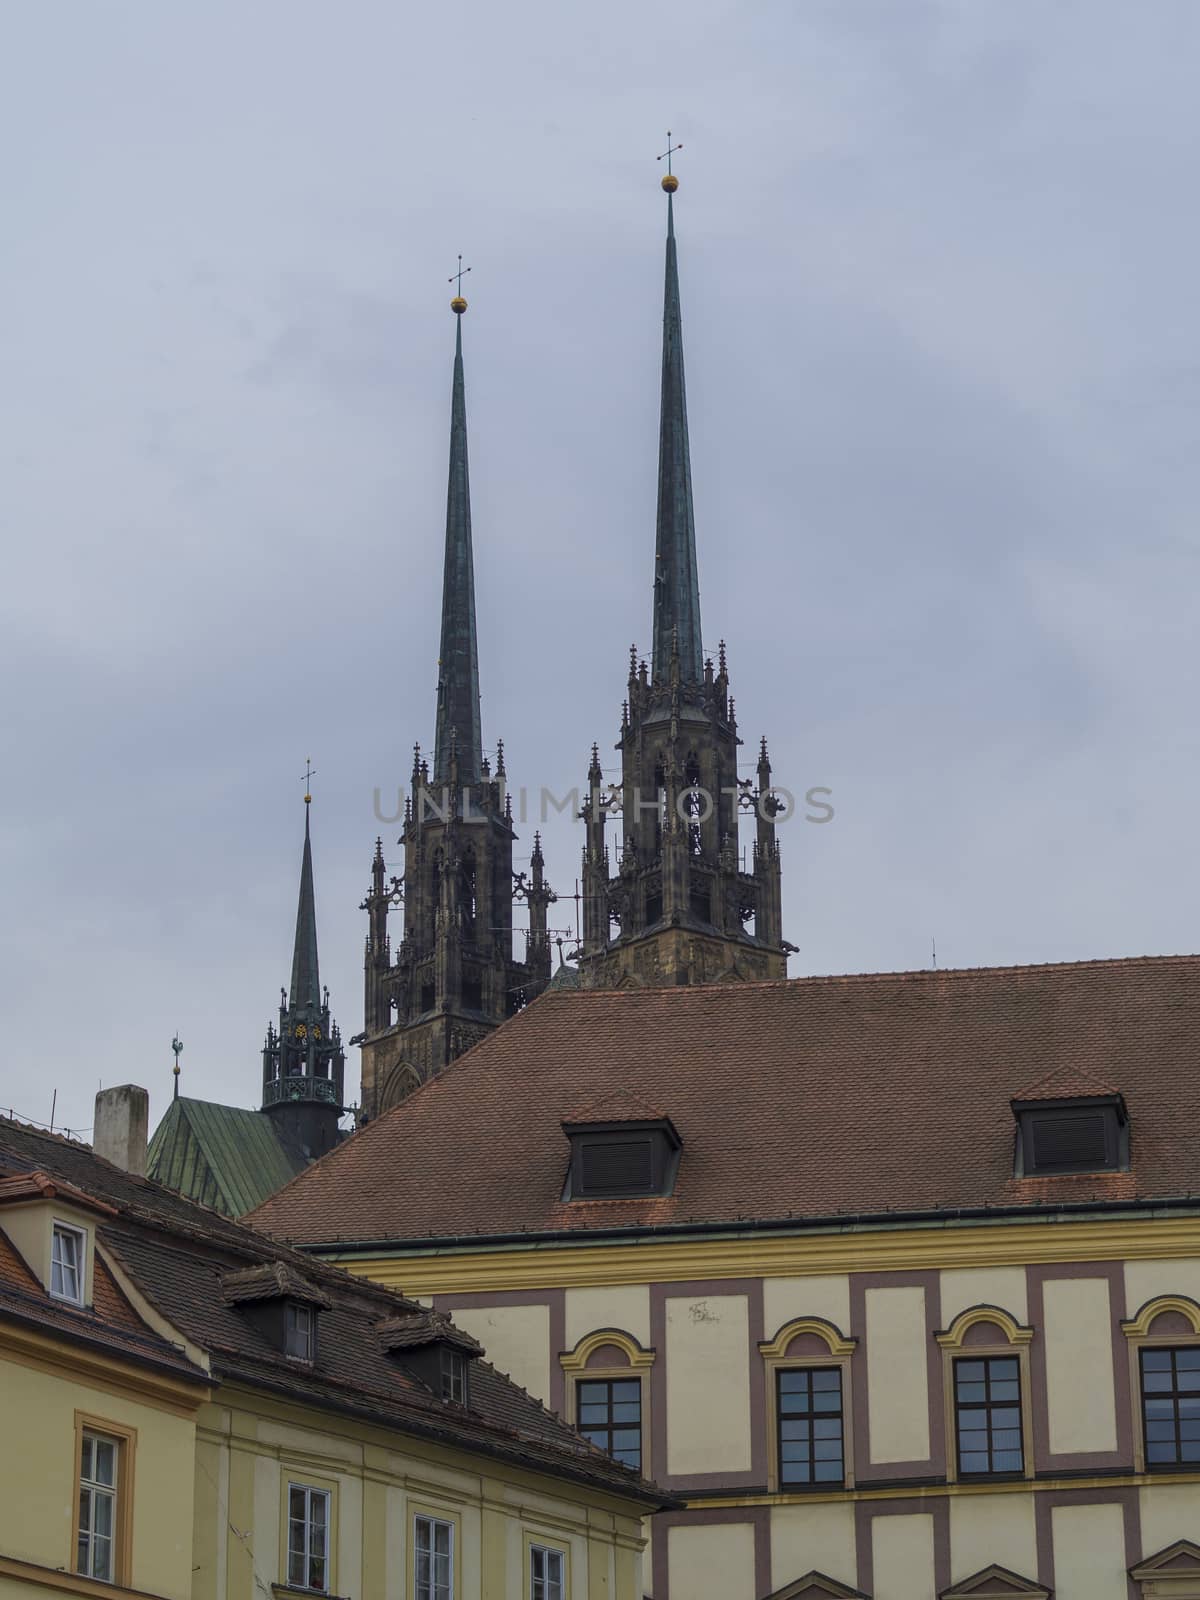 Brno historical city center with towers of gothic cathedral in c by Henkeova